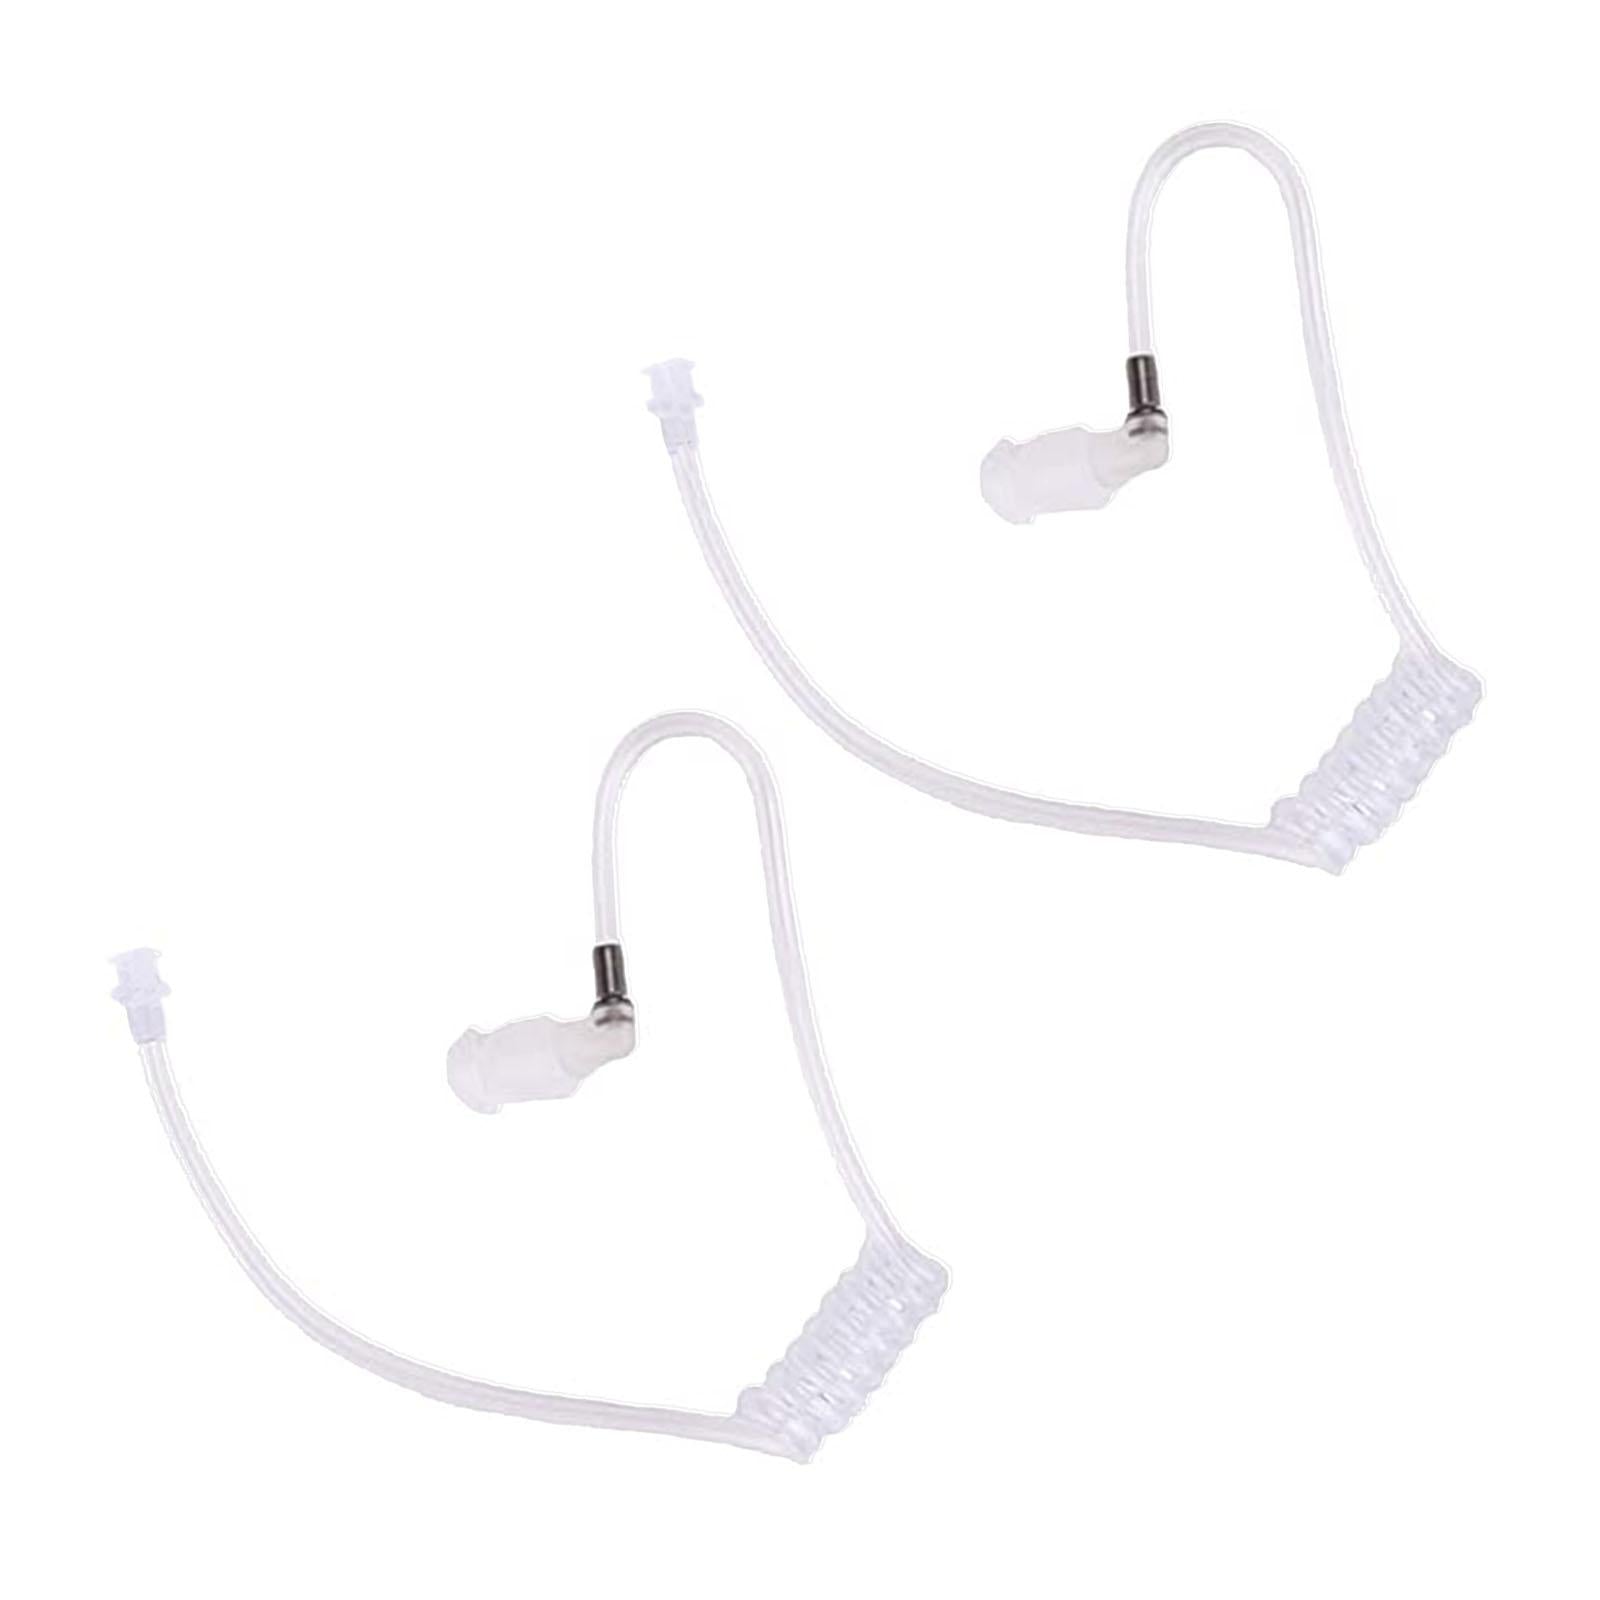 2 Pcs Replacement Acoustic Coil Tube Clear for Two Way Radio Talkie Earpiece